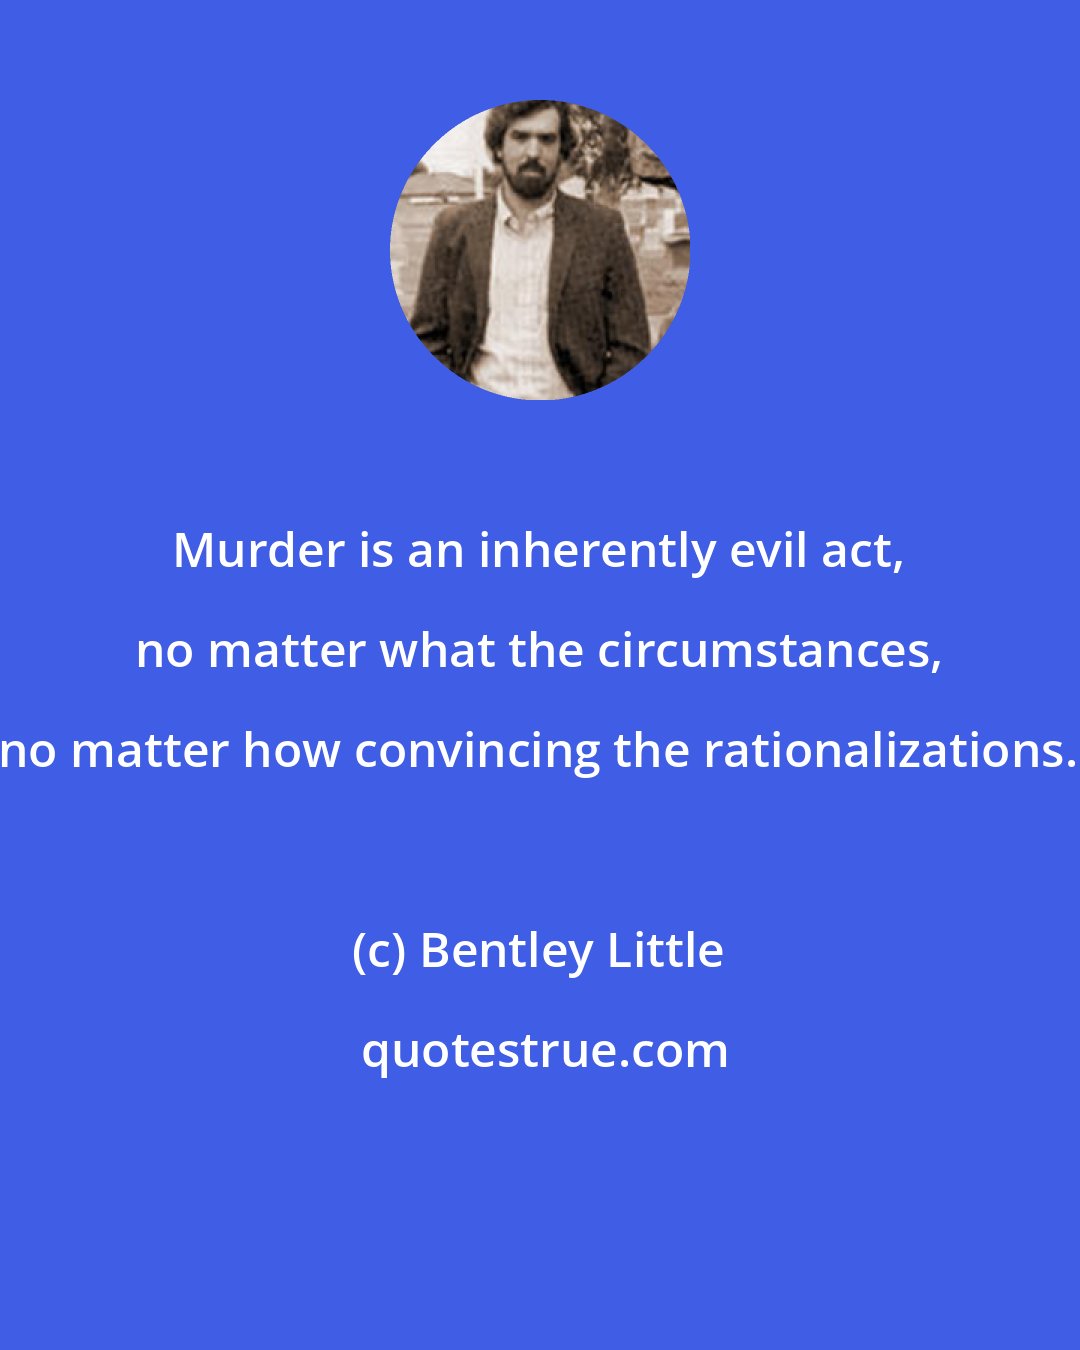 Bentley Little: Murder is an inherently evil act, no matter what the circumstances, no matter how convincing the rationalizations.